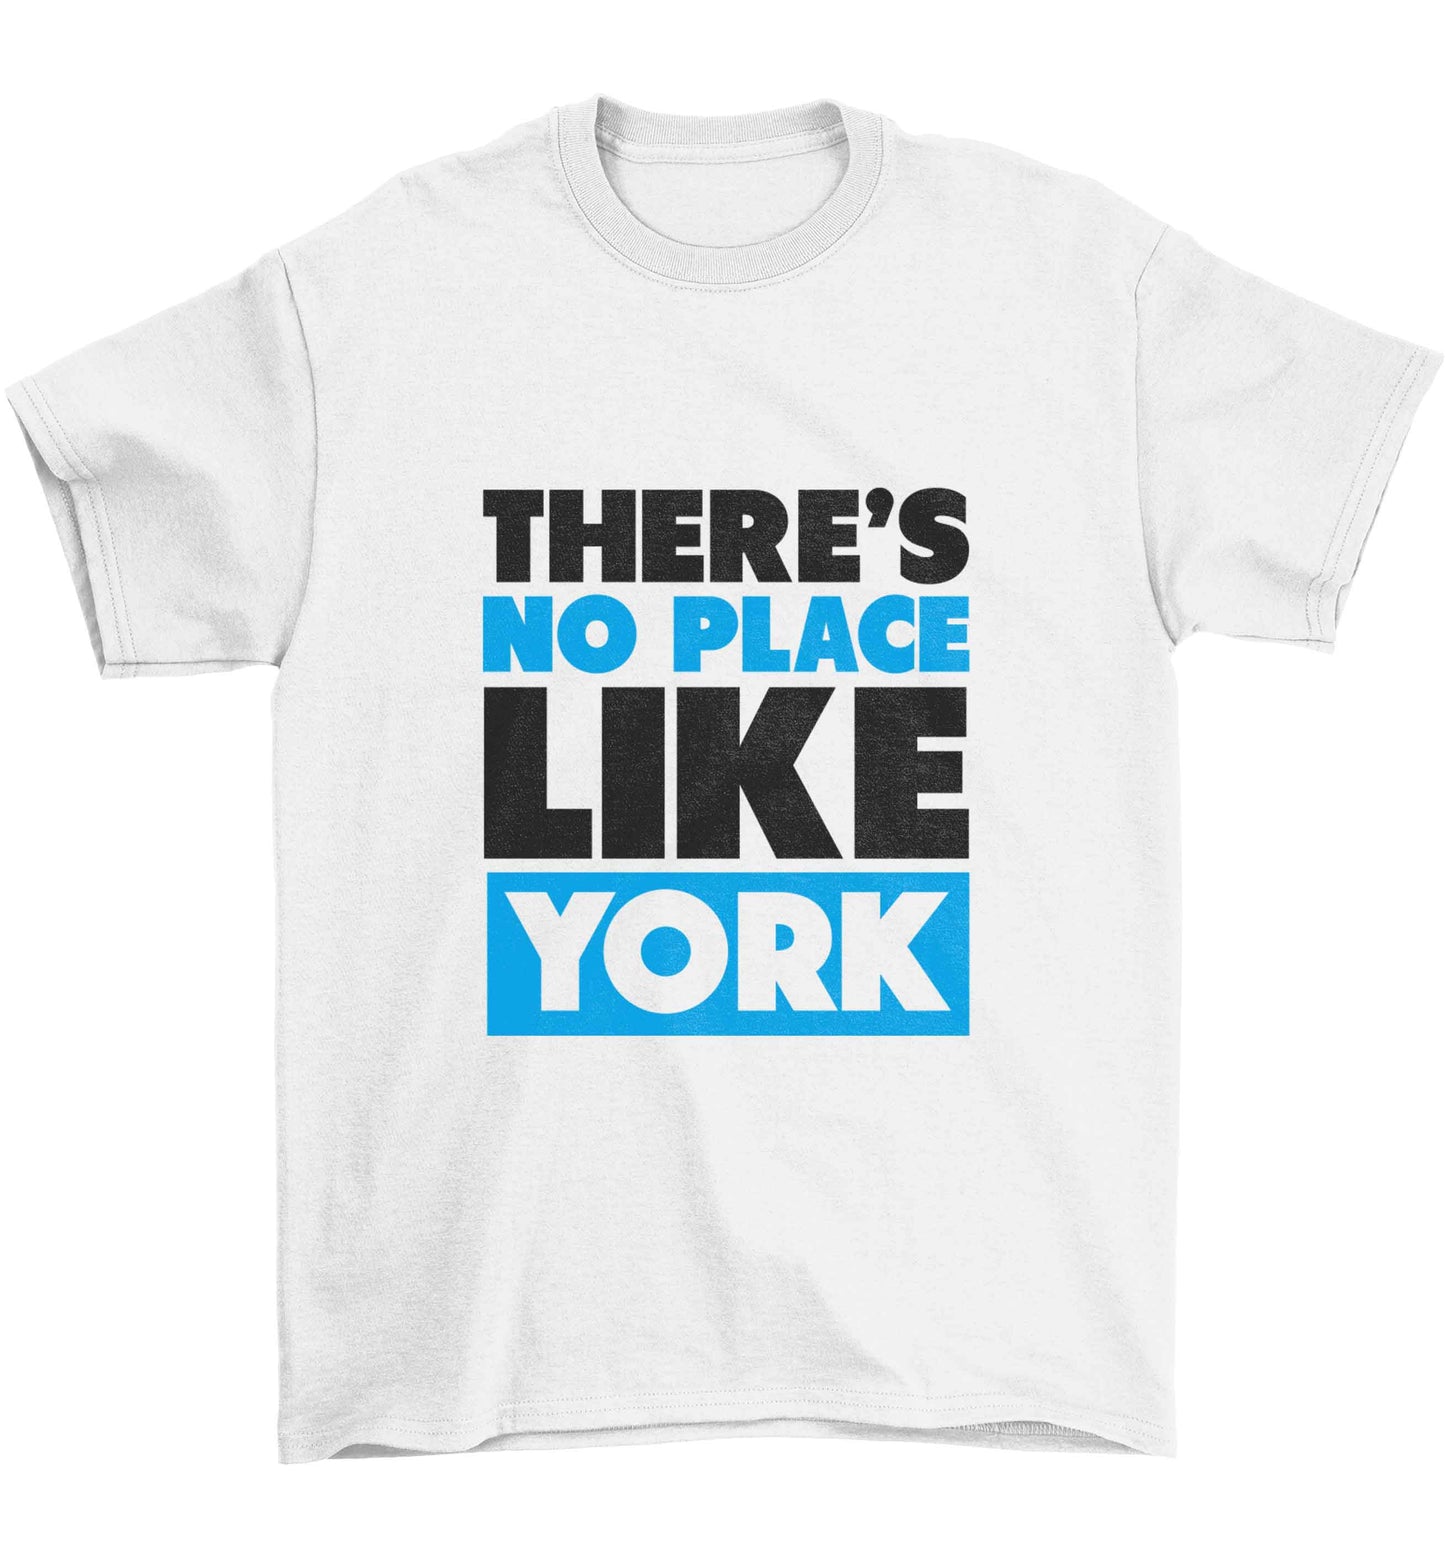 There's no place like york Children's white Tshirt 12-13 Years